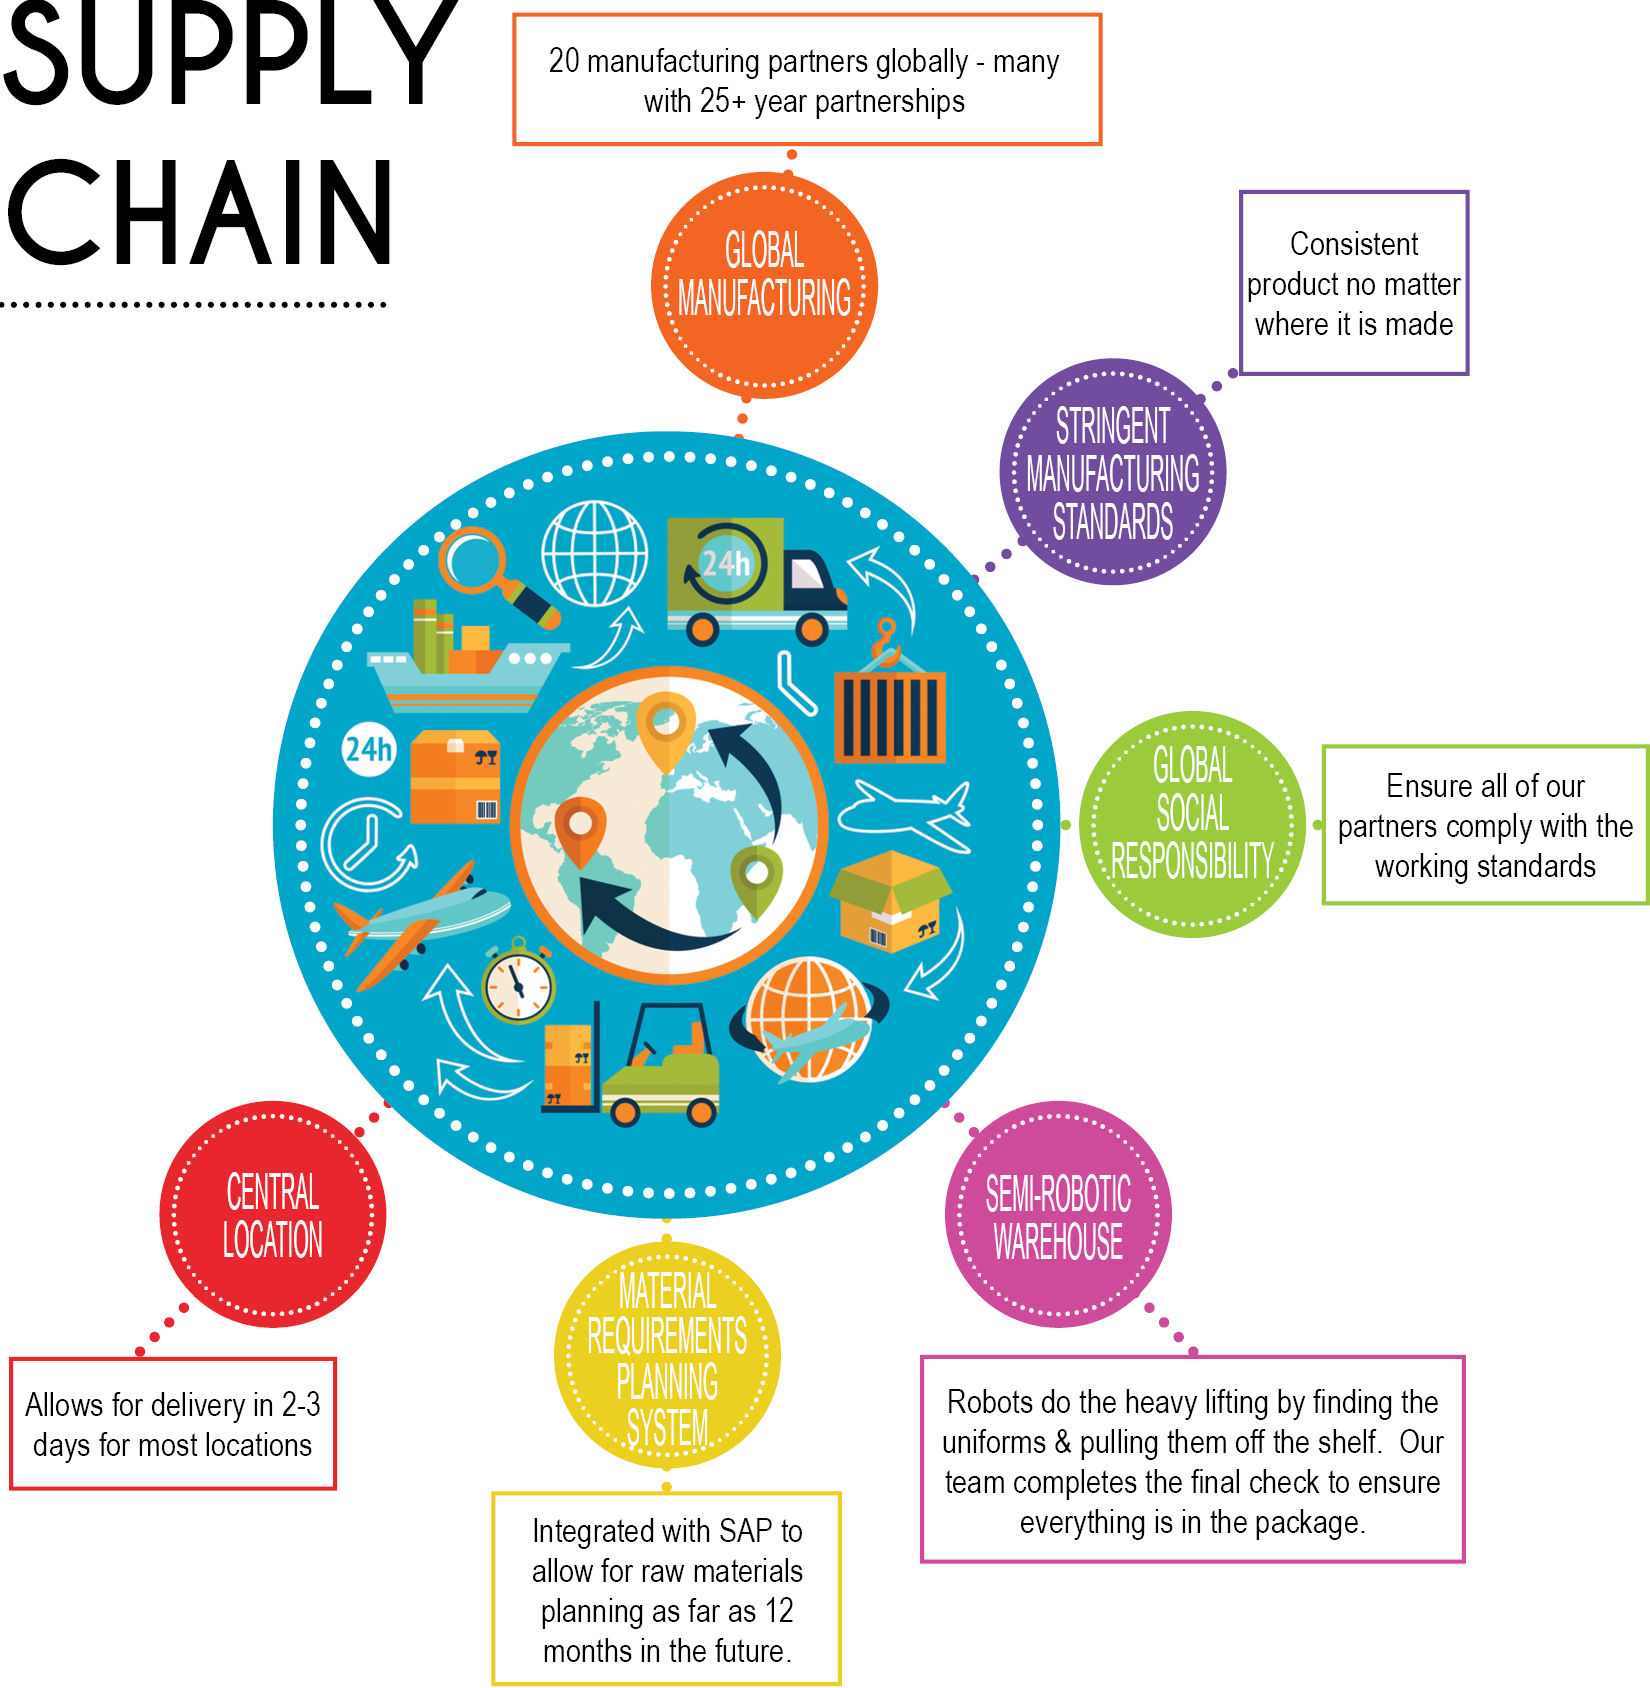 Supply Chain Management by Fashion Seal Healthcare